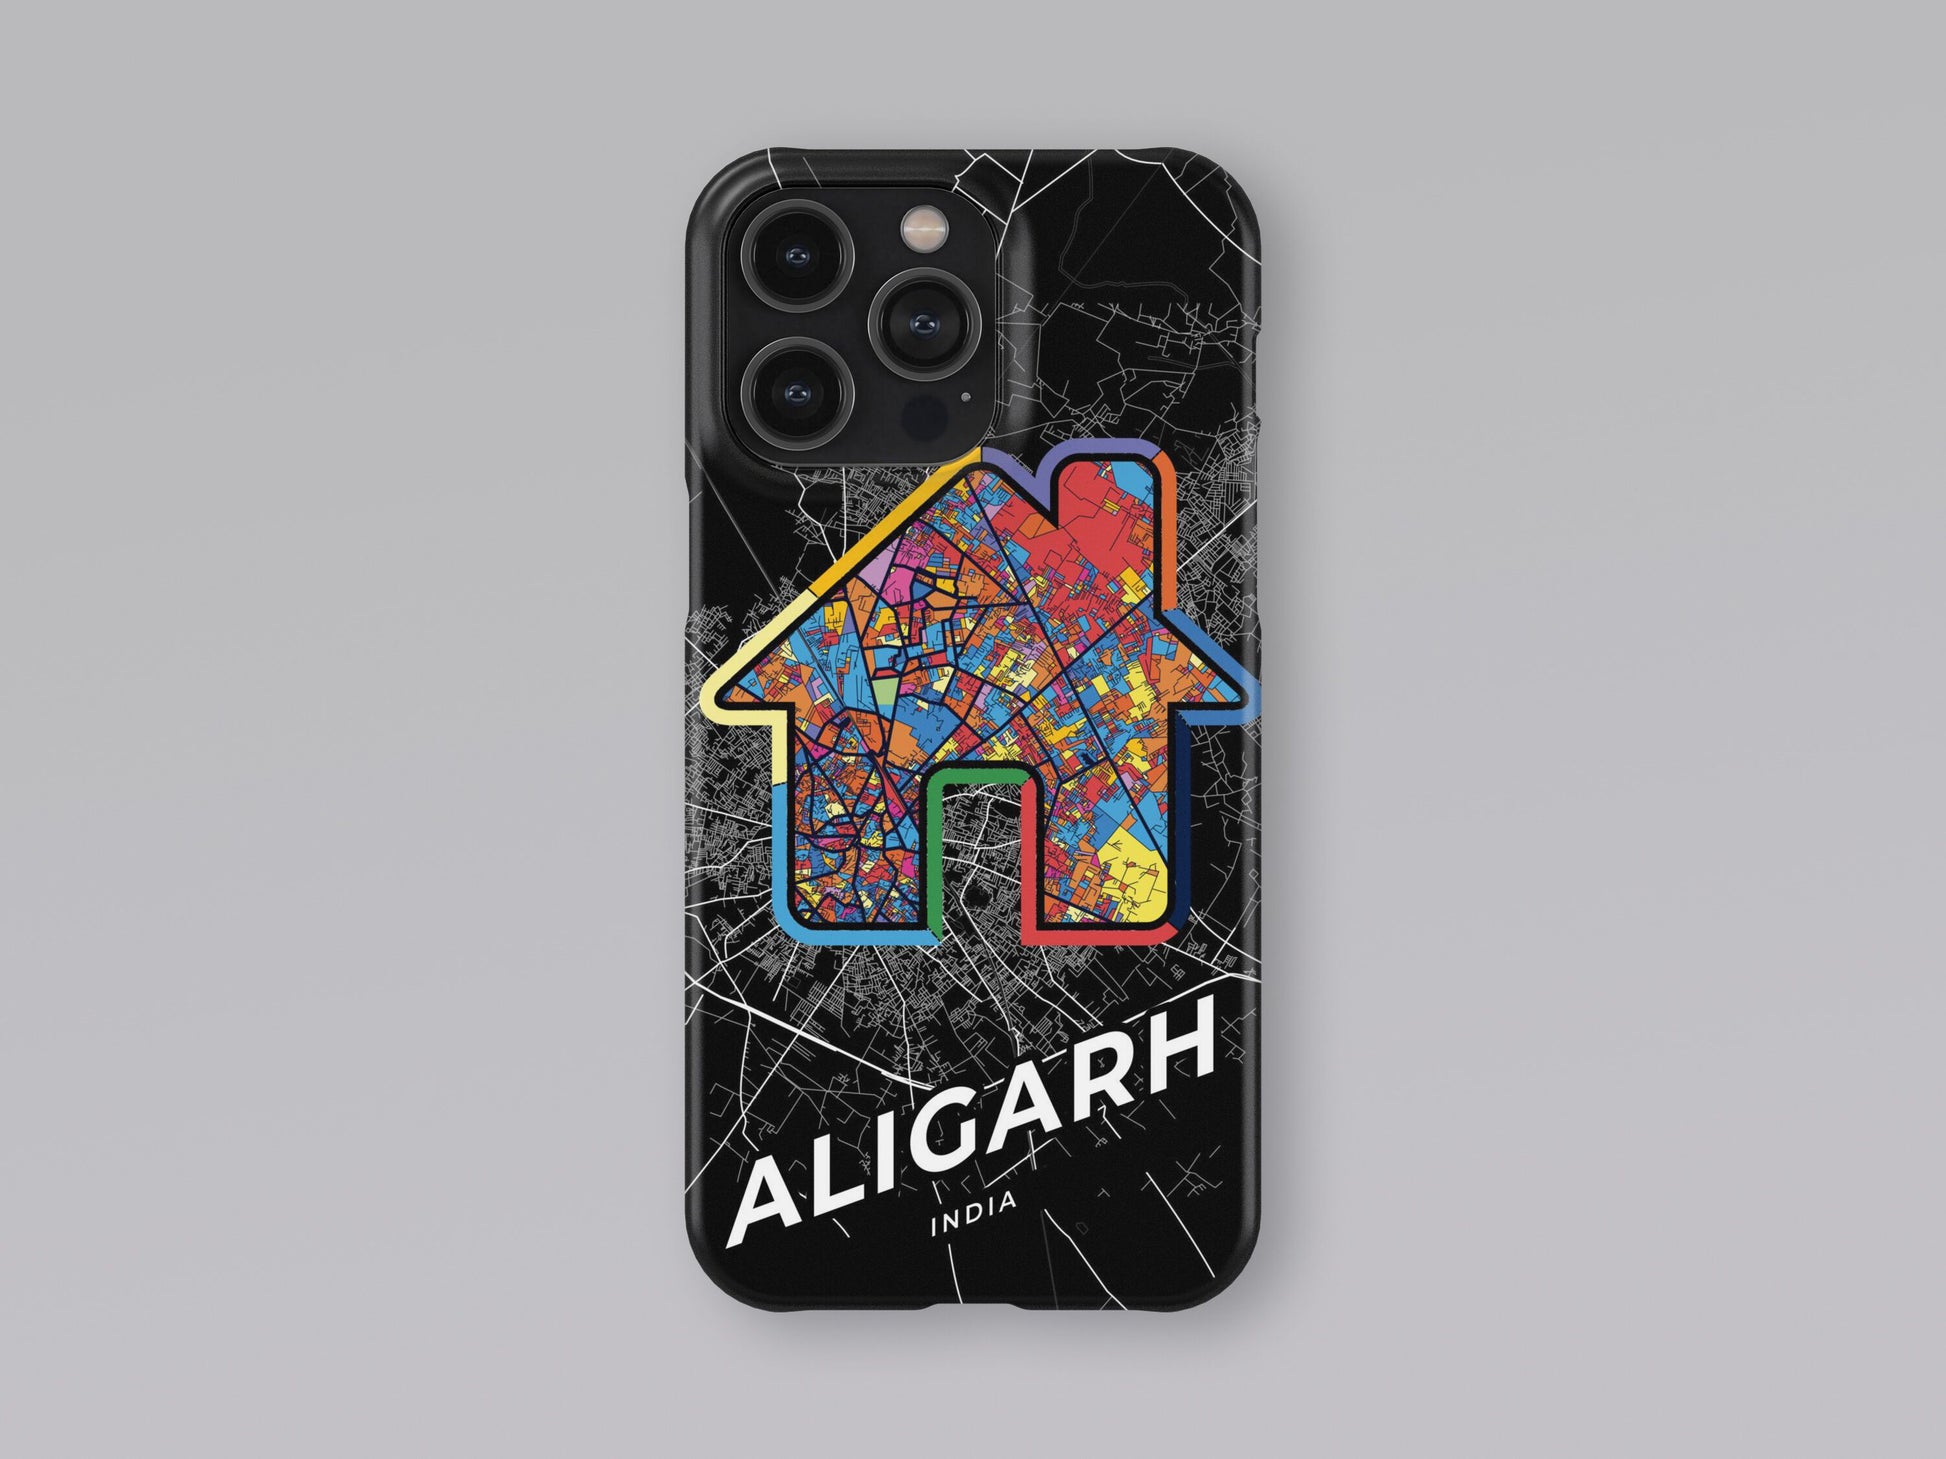 Aligarh India slim phone case with colorful icon. Birthday, wedding or housewarming gift. Couple match cases. 3